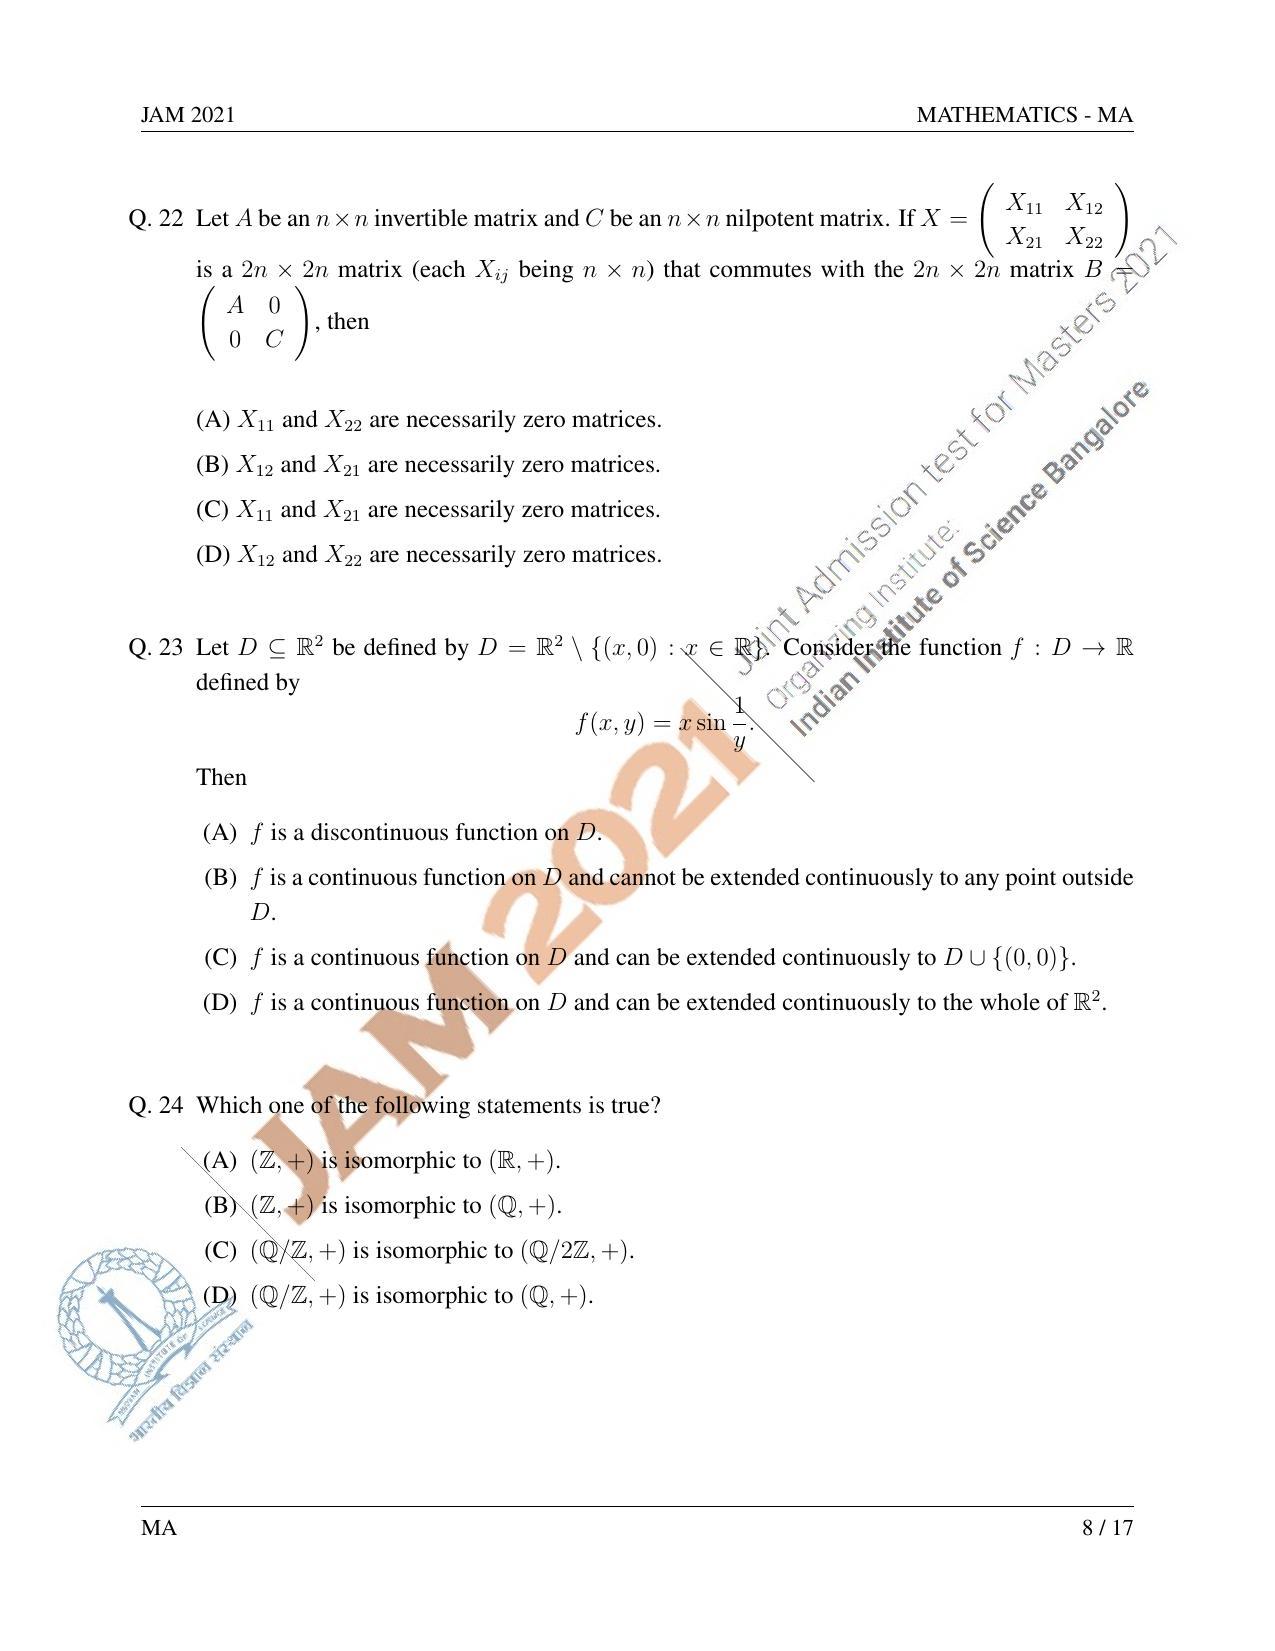 JAM 2021: MA Question Paper - Page 9